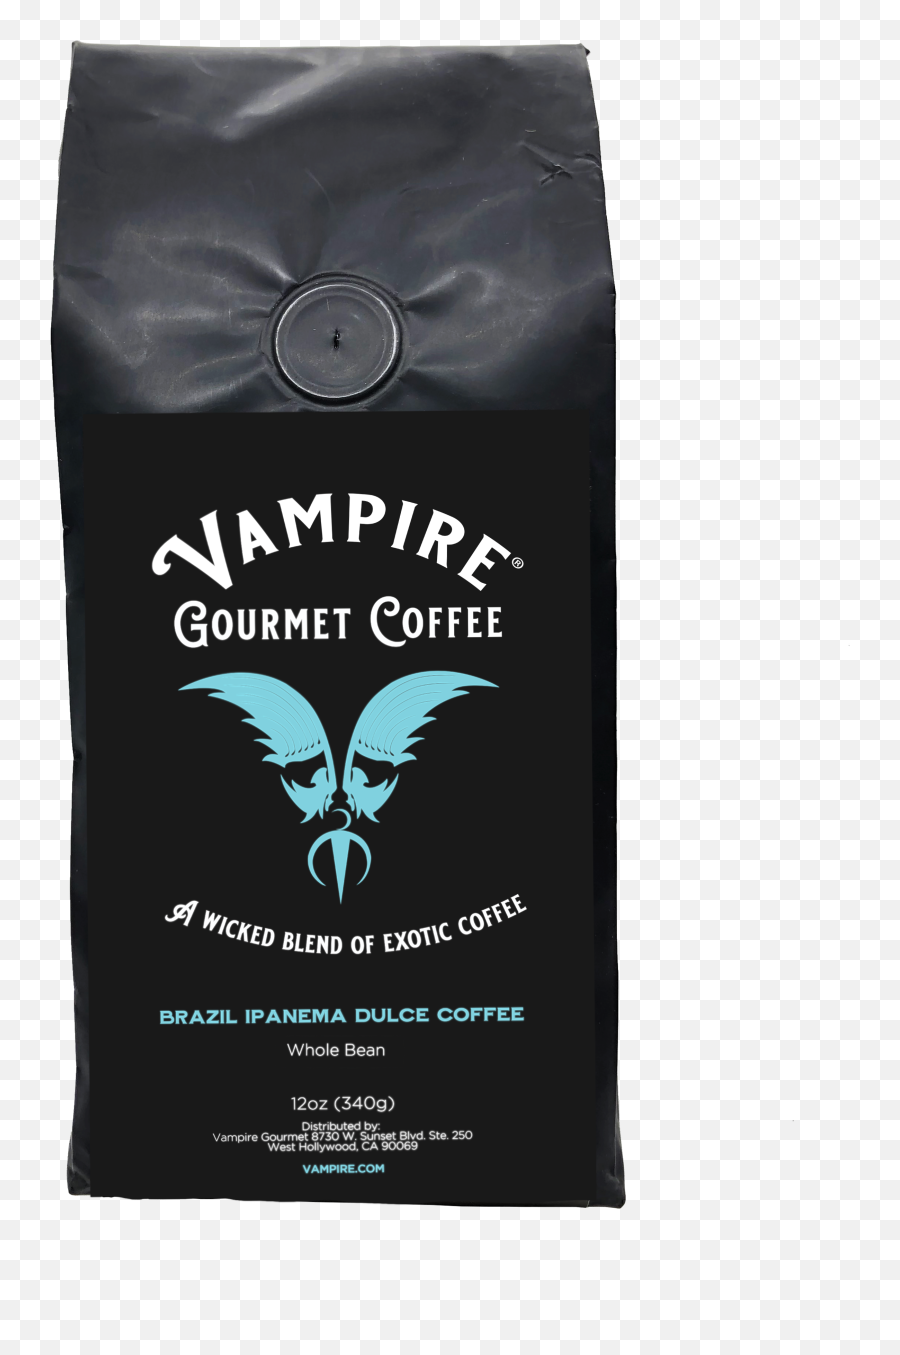 Vampire Coffee - Brazil Ipanema Dulce Whole Bean Vampire Packaging And Labeling Png,Vixx Icon